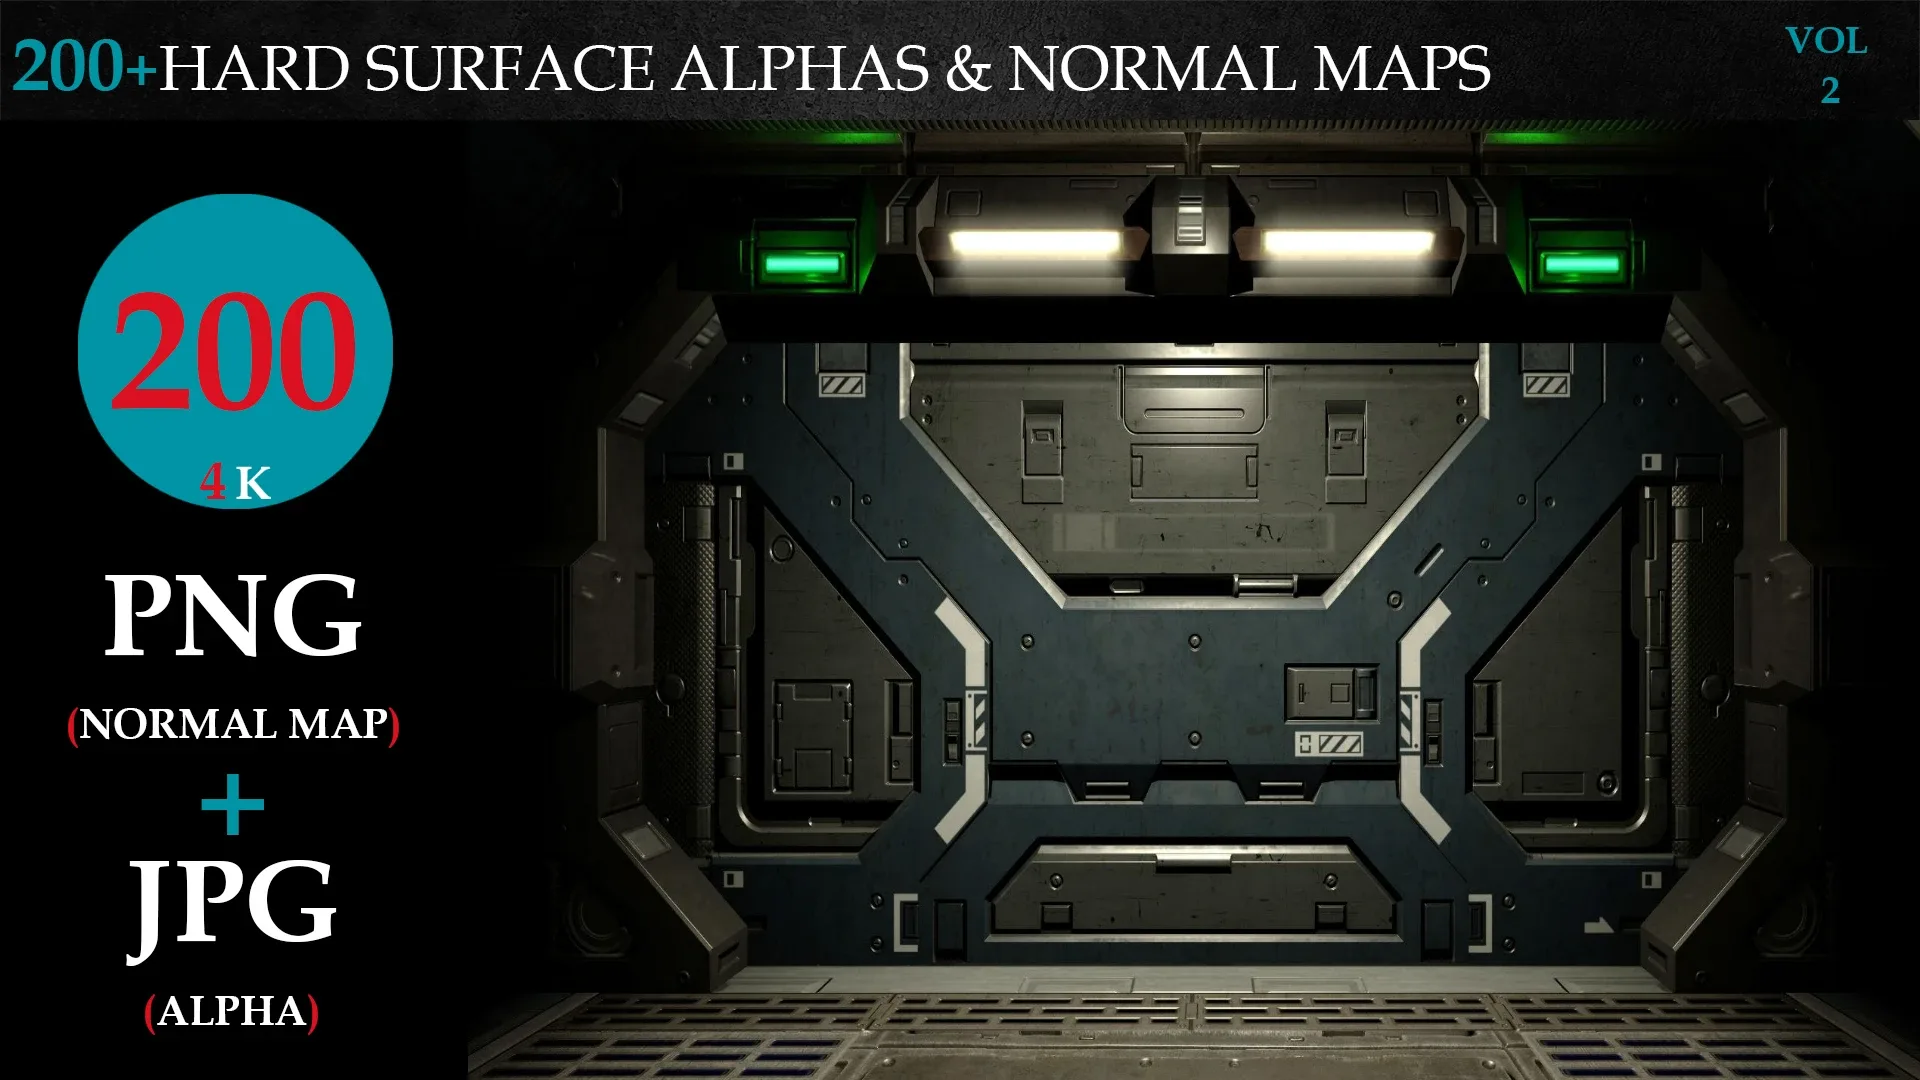 200+HARD SURFACE ALPHAS & NORMAL MAPS-vol 2